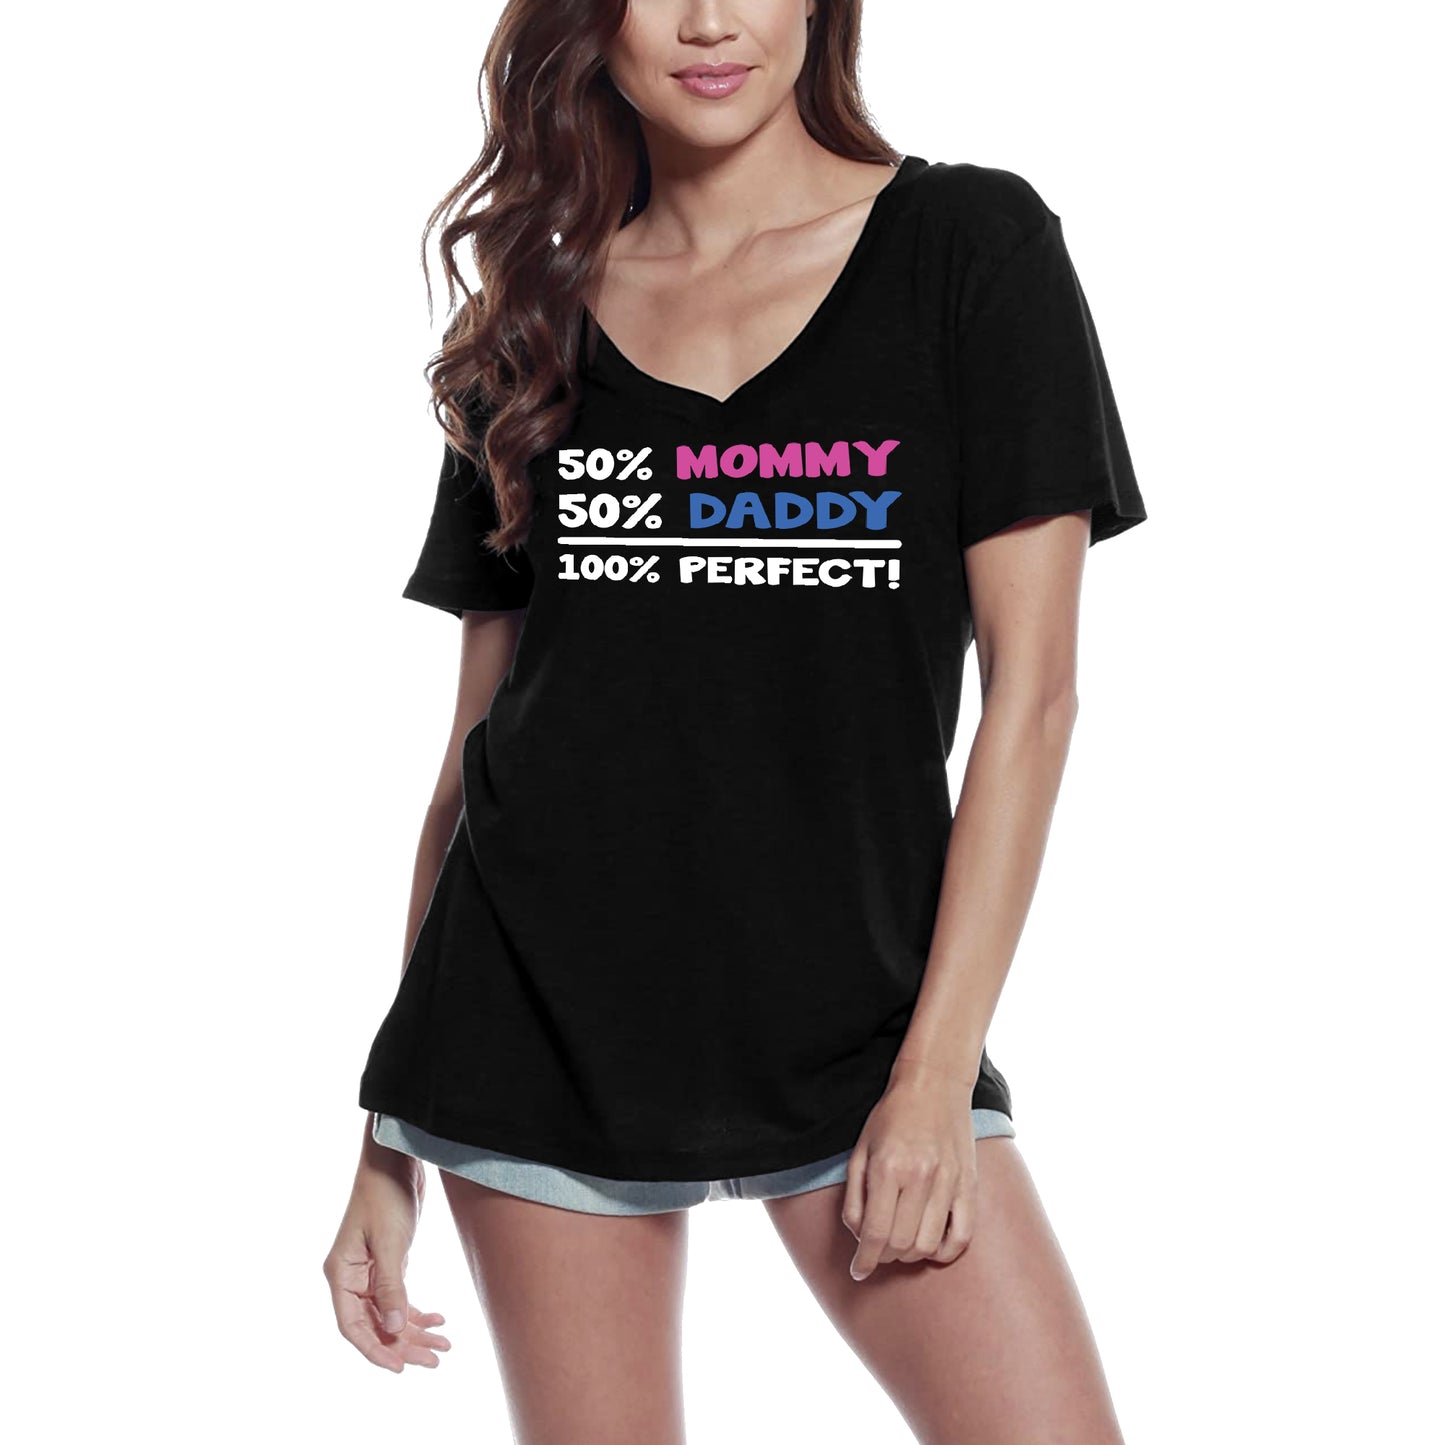 ULTRABASIC Women's T-Shirt 50% Mommy 50% Daddy - Perfect Tee Shirt for Ladies